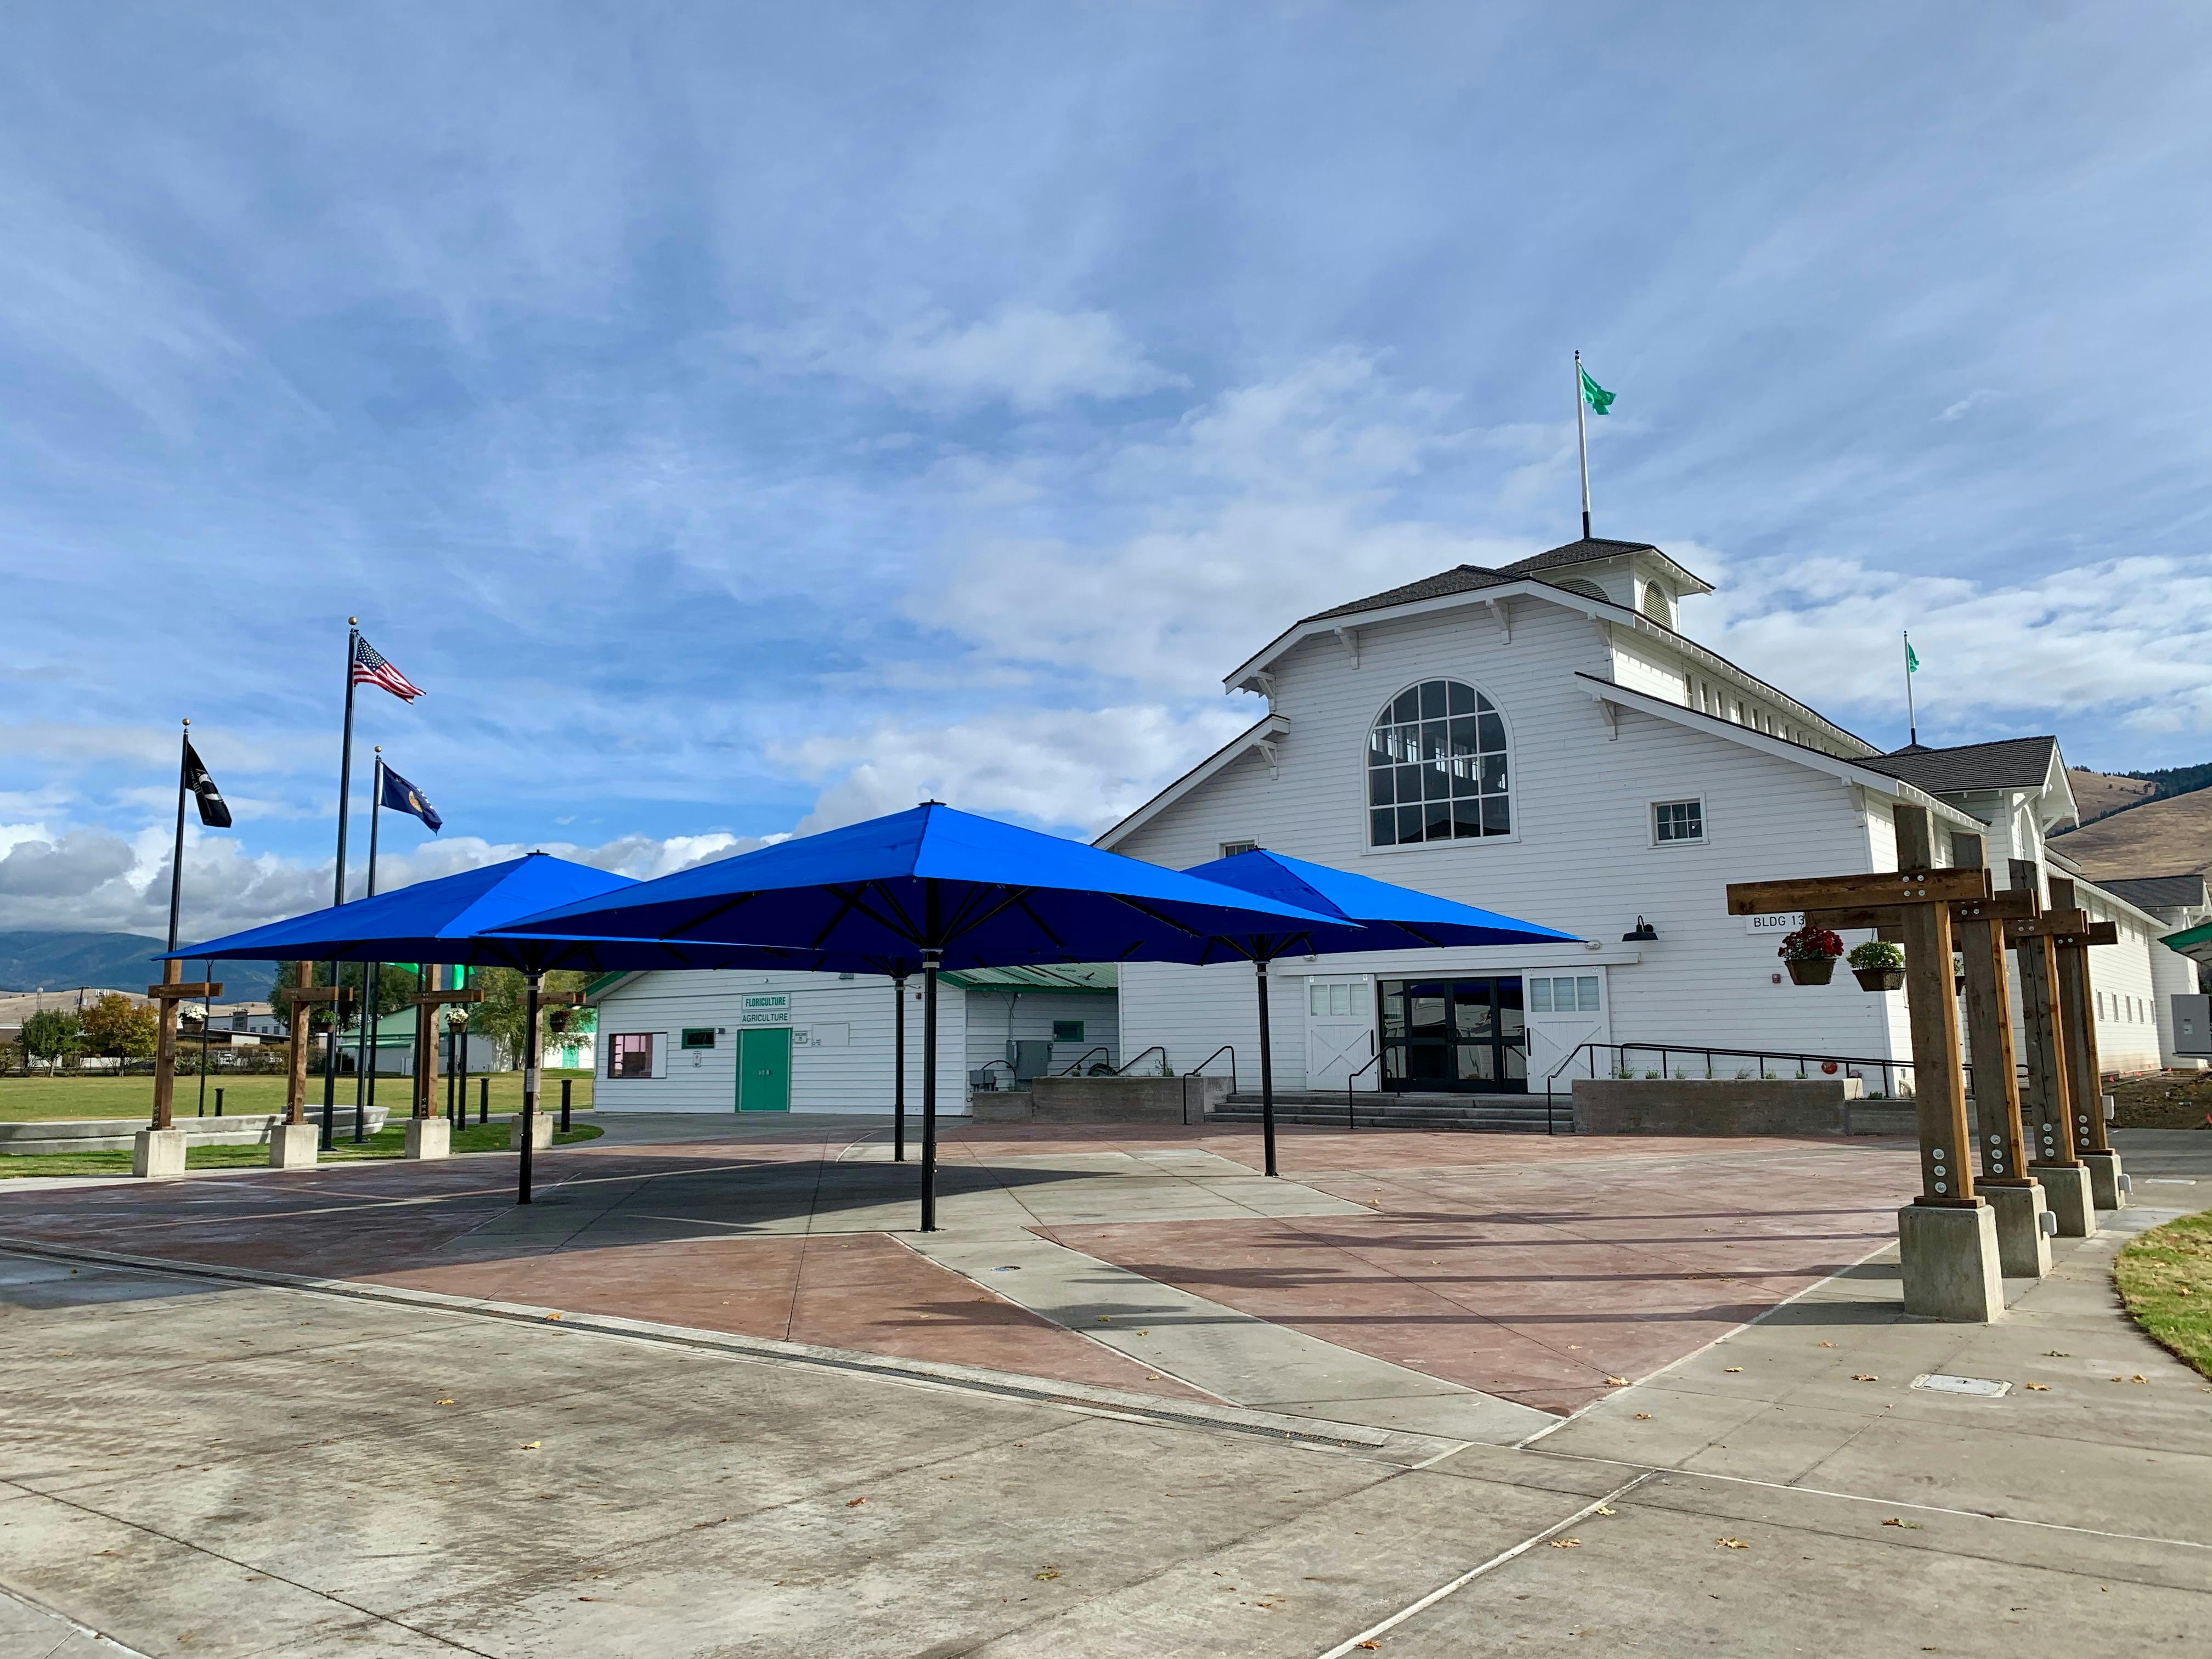 The Commercial Building and the Historic Plaza on a sunny day with a blue sky. Blue umbrellas are open.